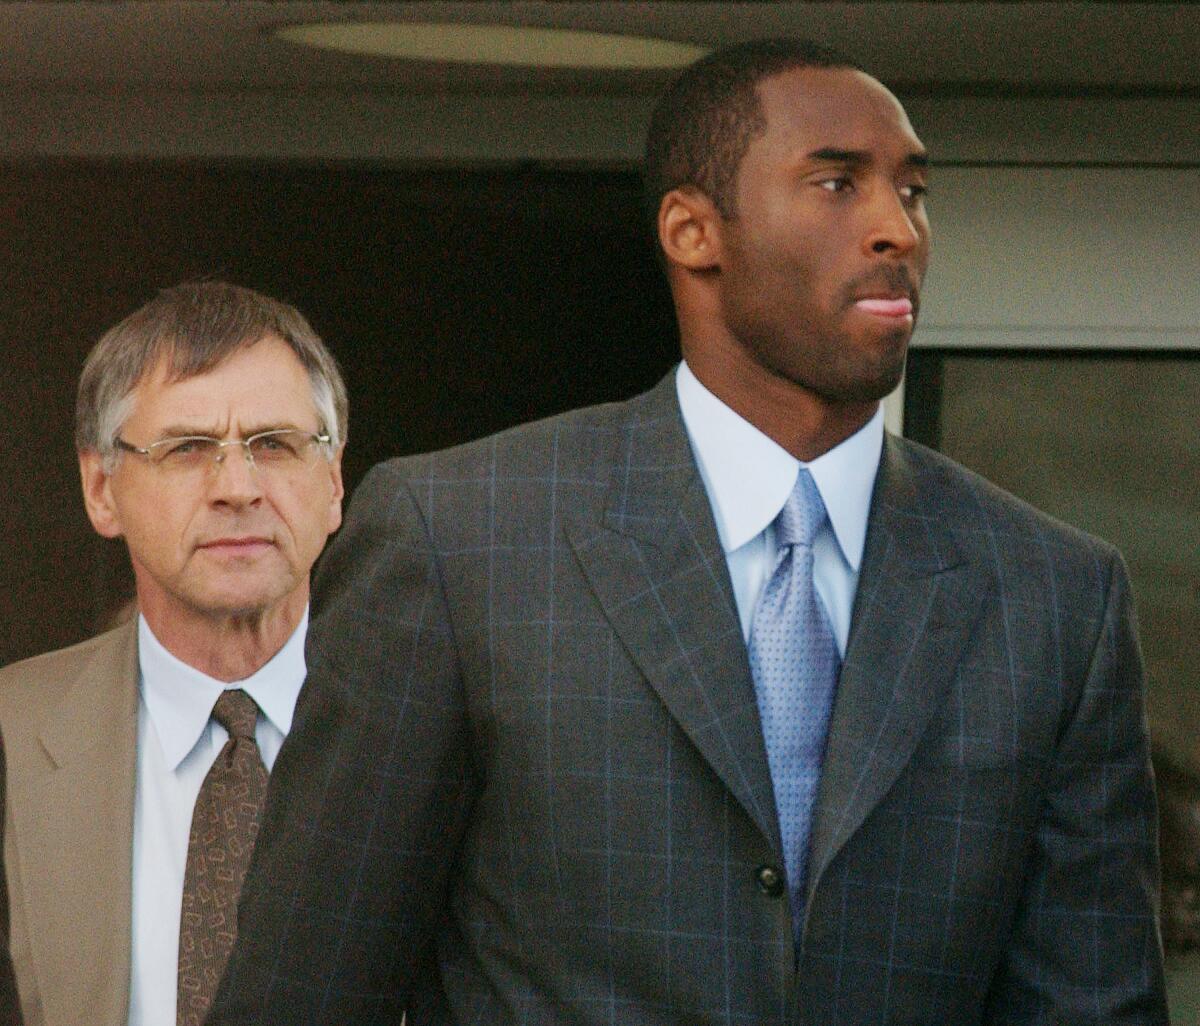 Kobe Bryant and attorney Hal Haddon leave the Eagle County Justice Center after the third day of jury selection for the trial on sexual assault charges.